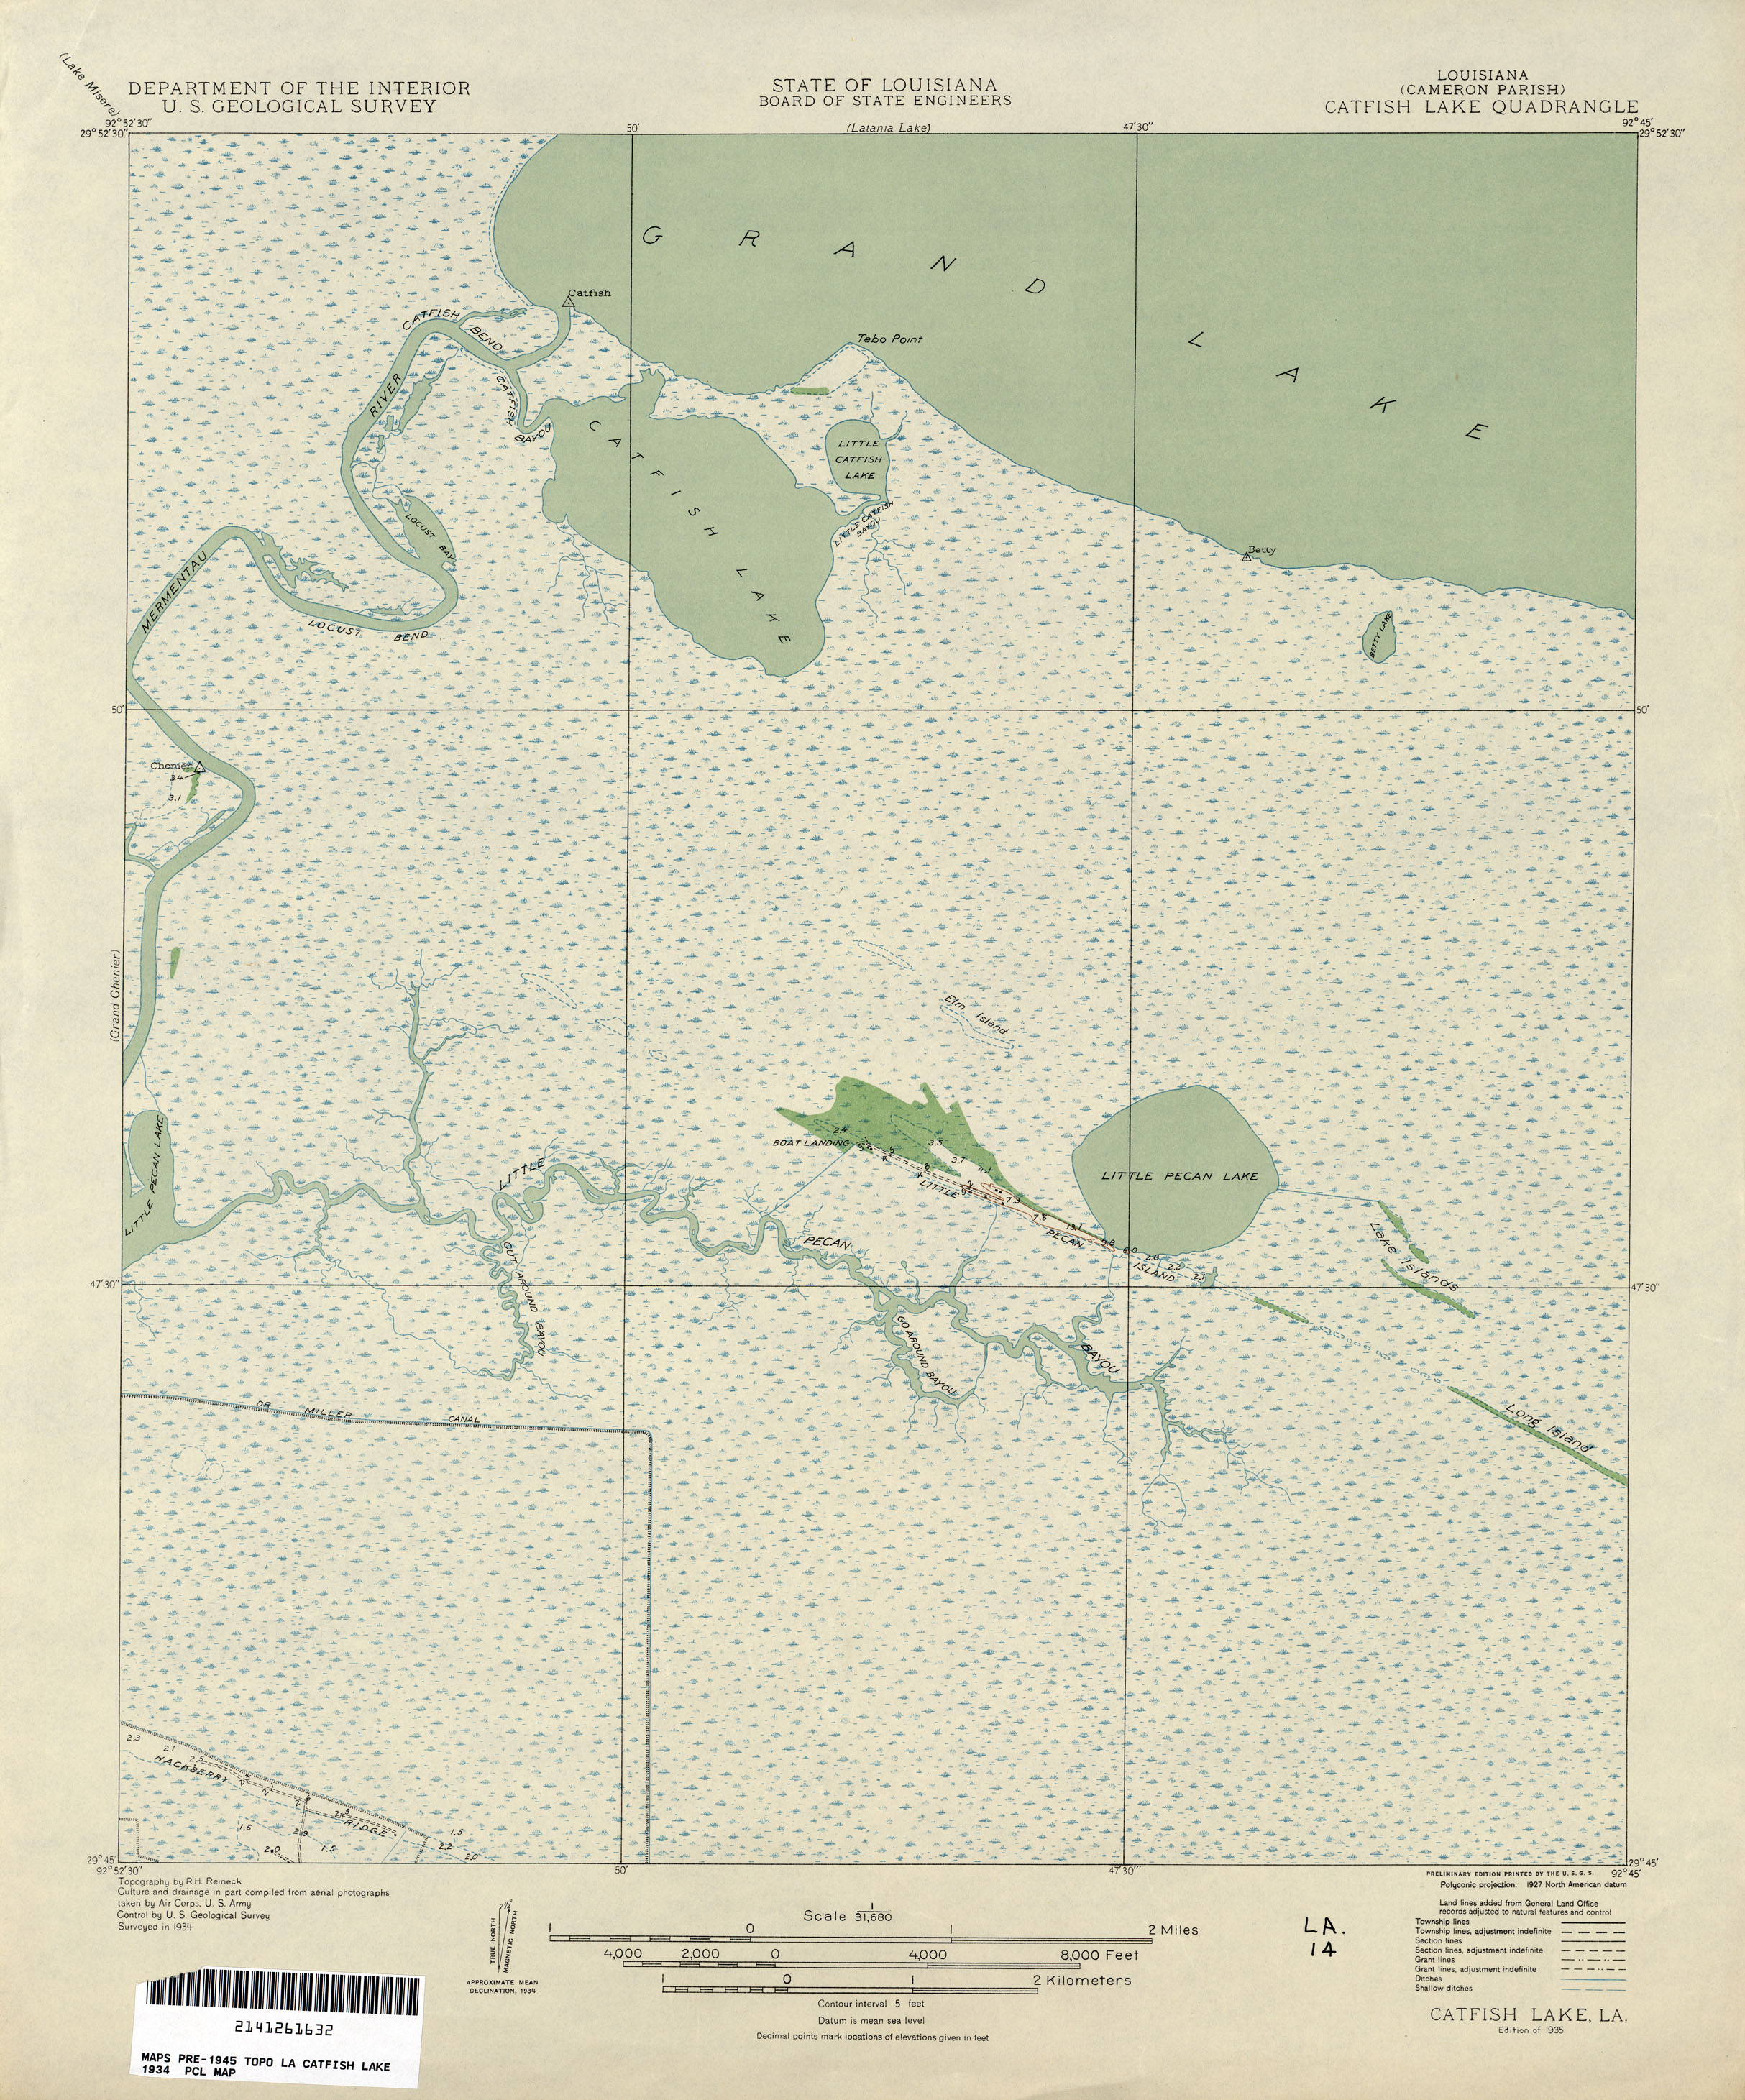 Louisiana Maps - Perry-Castañeda Map Collection - UT Library Online